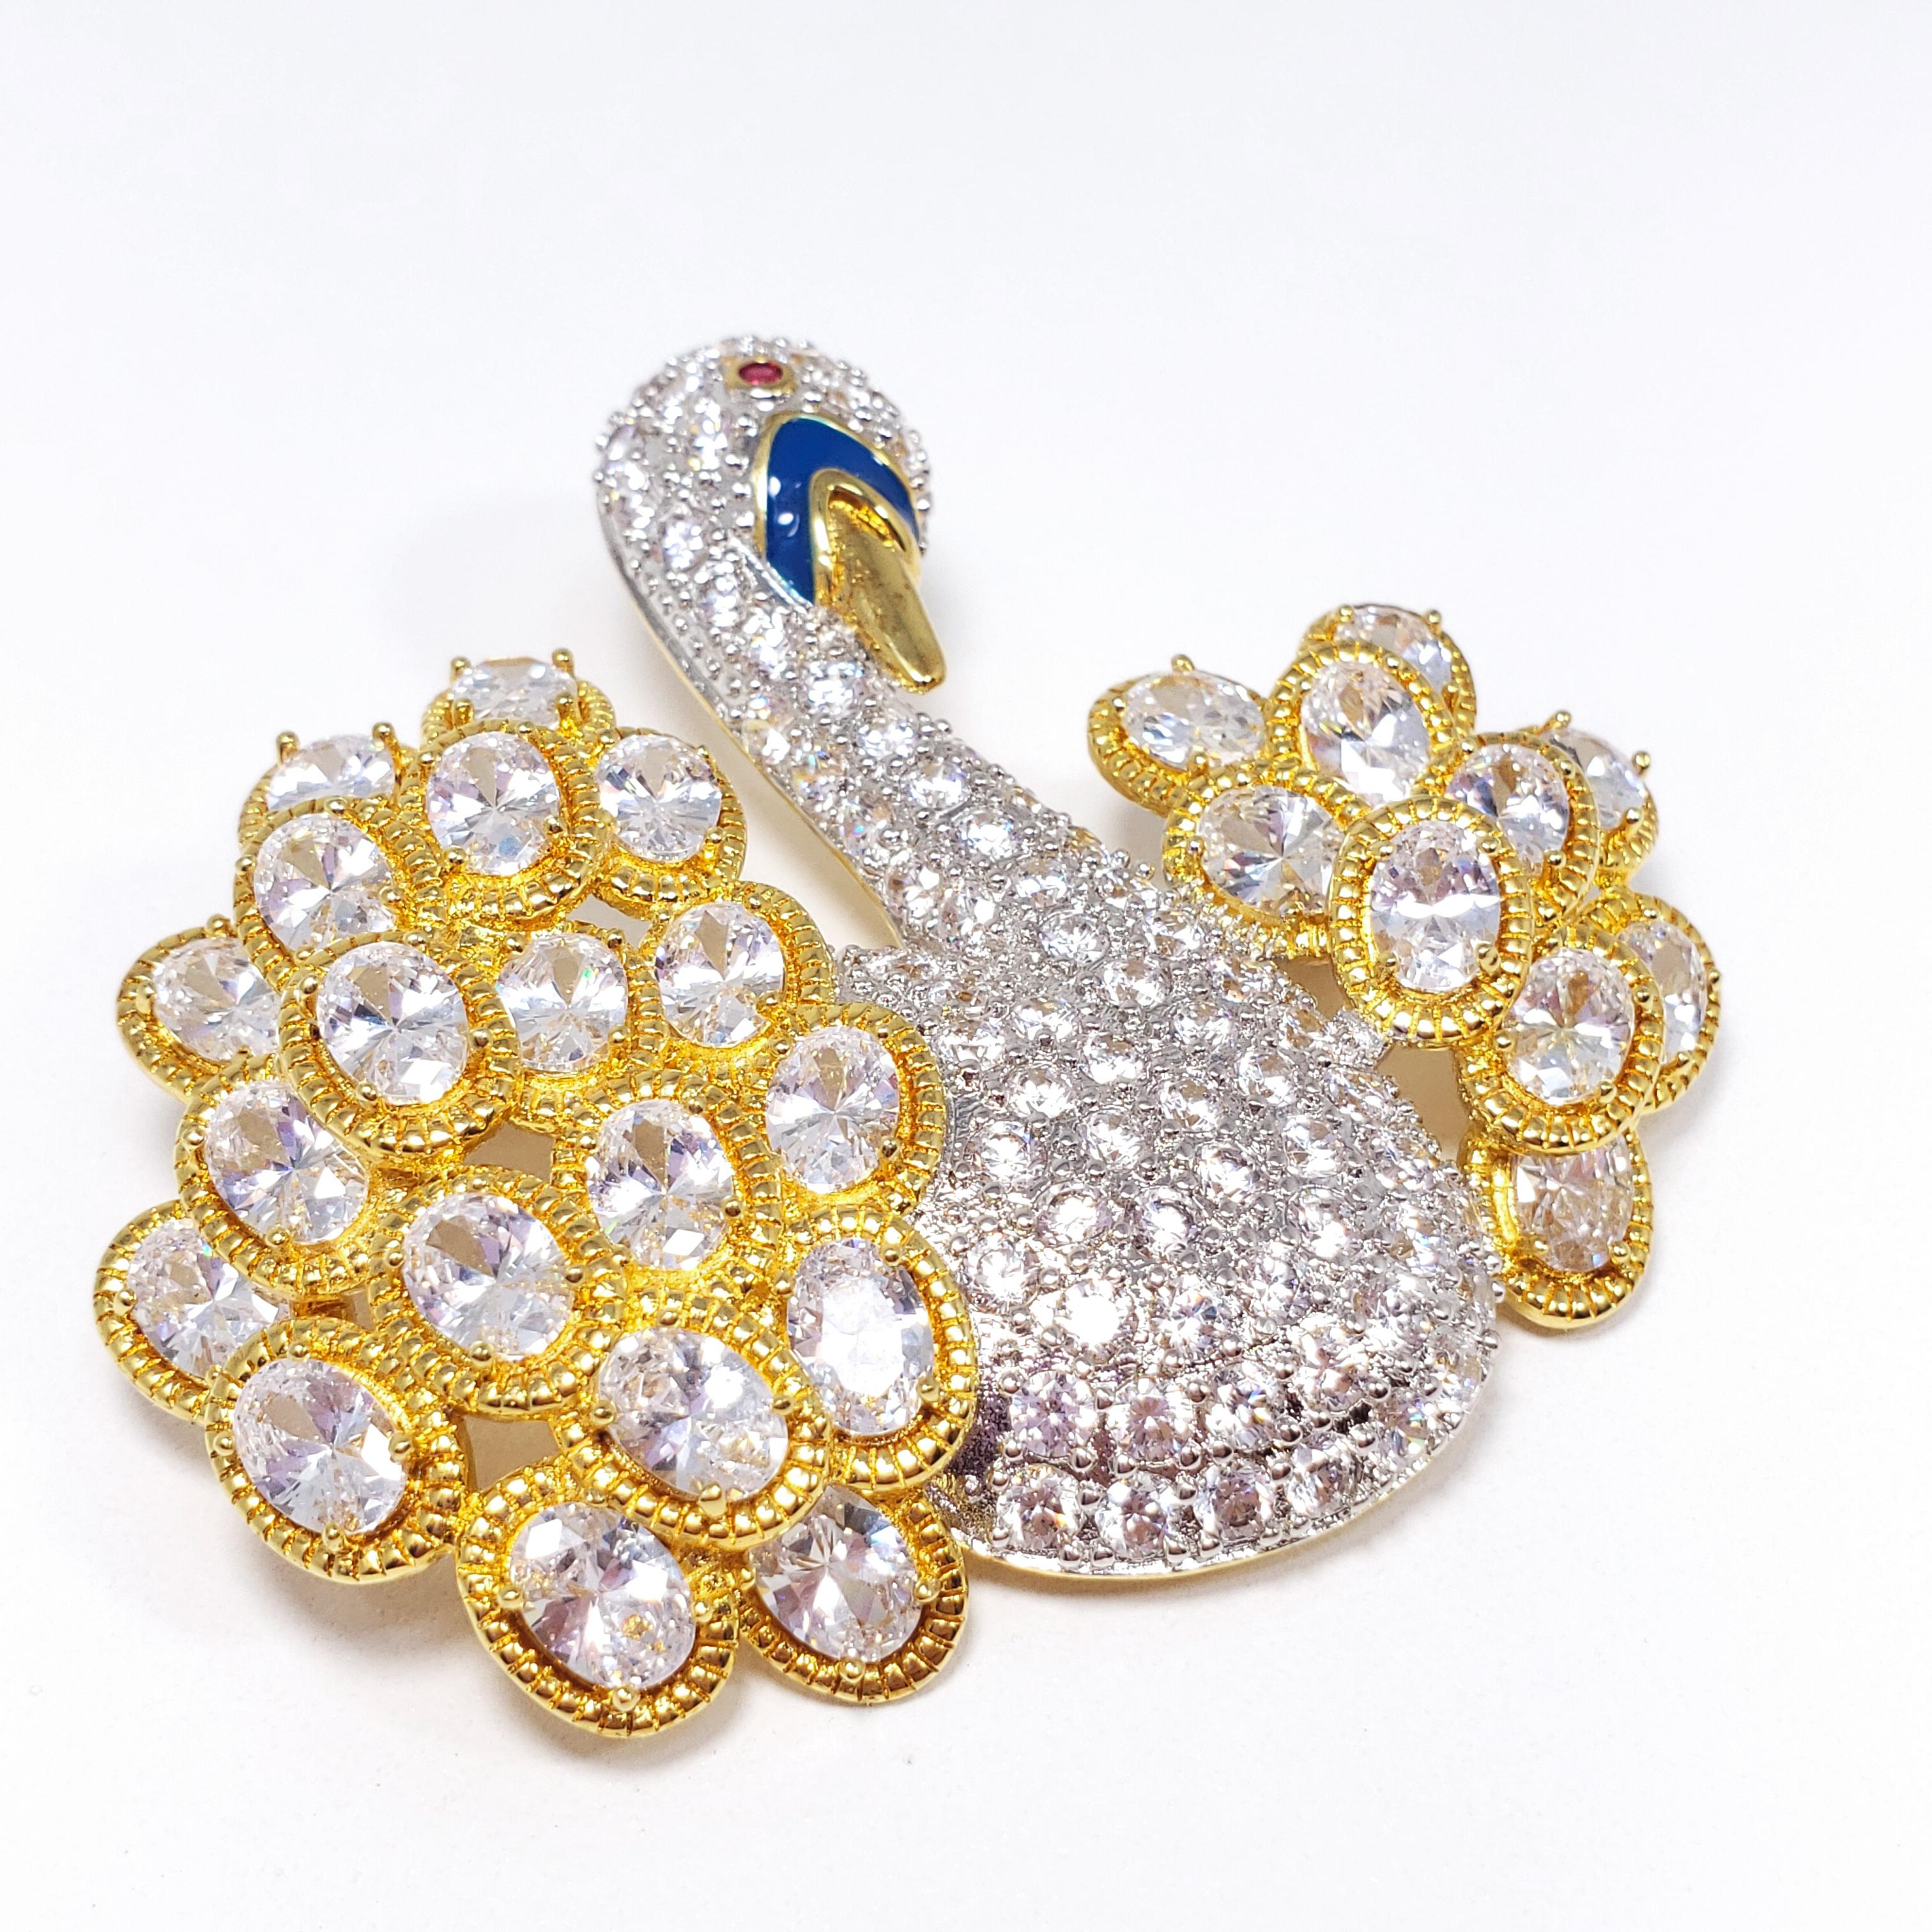 An ornate swan decorated with pave cubic zirconia and blue enamel, prong set in a gold plated metal. Brilliant luster and shine - this brooch is sure to catch everyone's attention! By Kenneth Jay Lane.

Hallmarks: © KJLane
